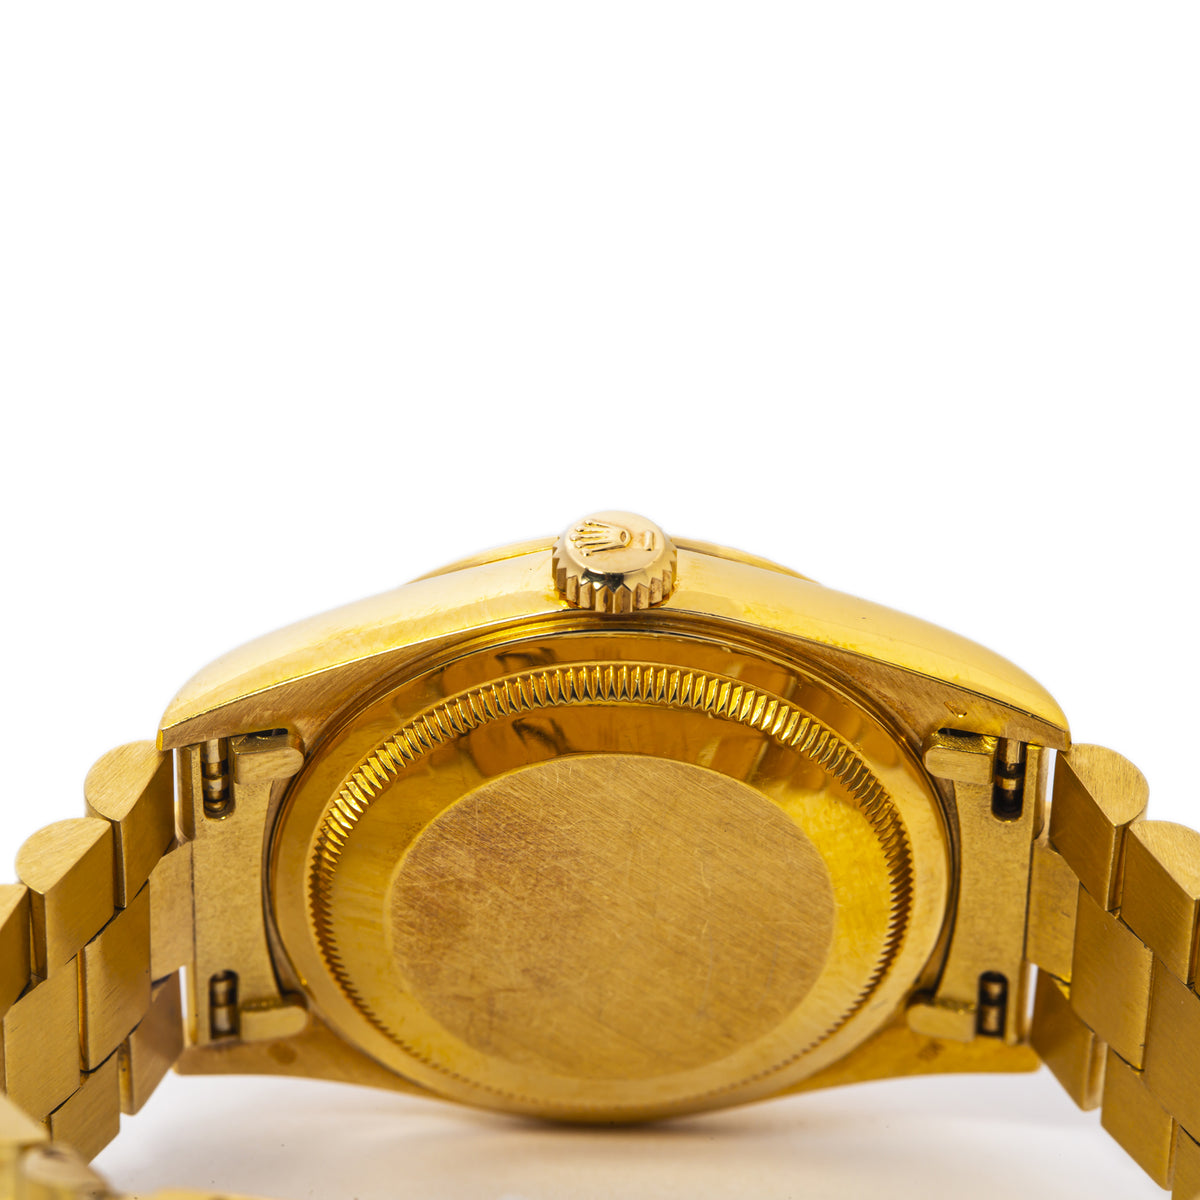 Rolex Day-Date 18238 18k Yellow Gold President Champagne Watch 36mm 1994 Paper